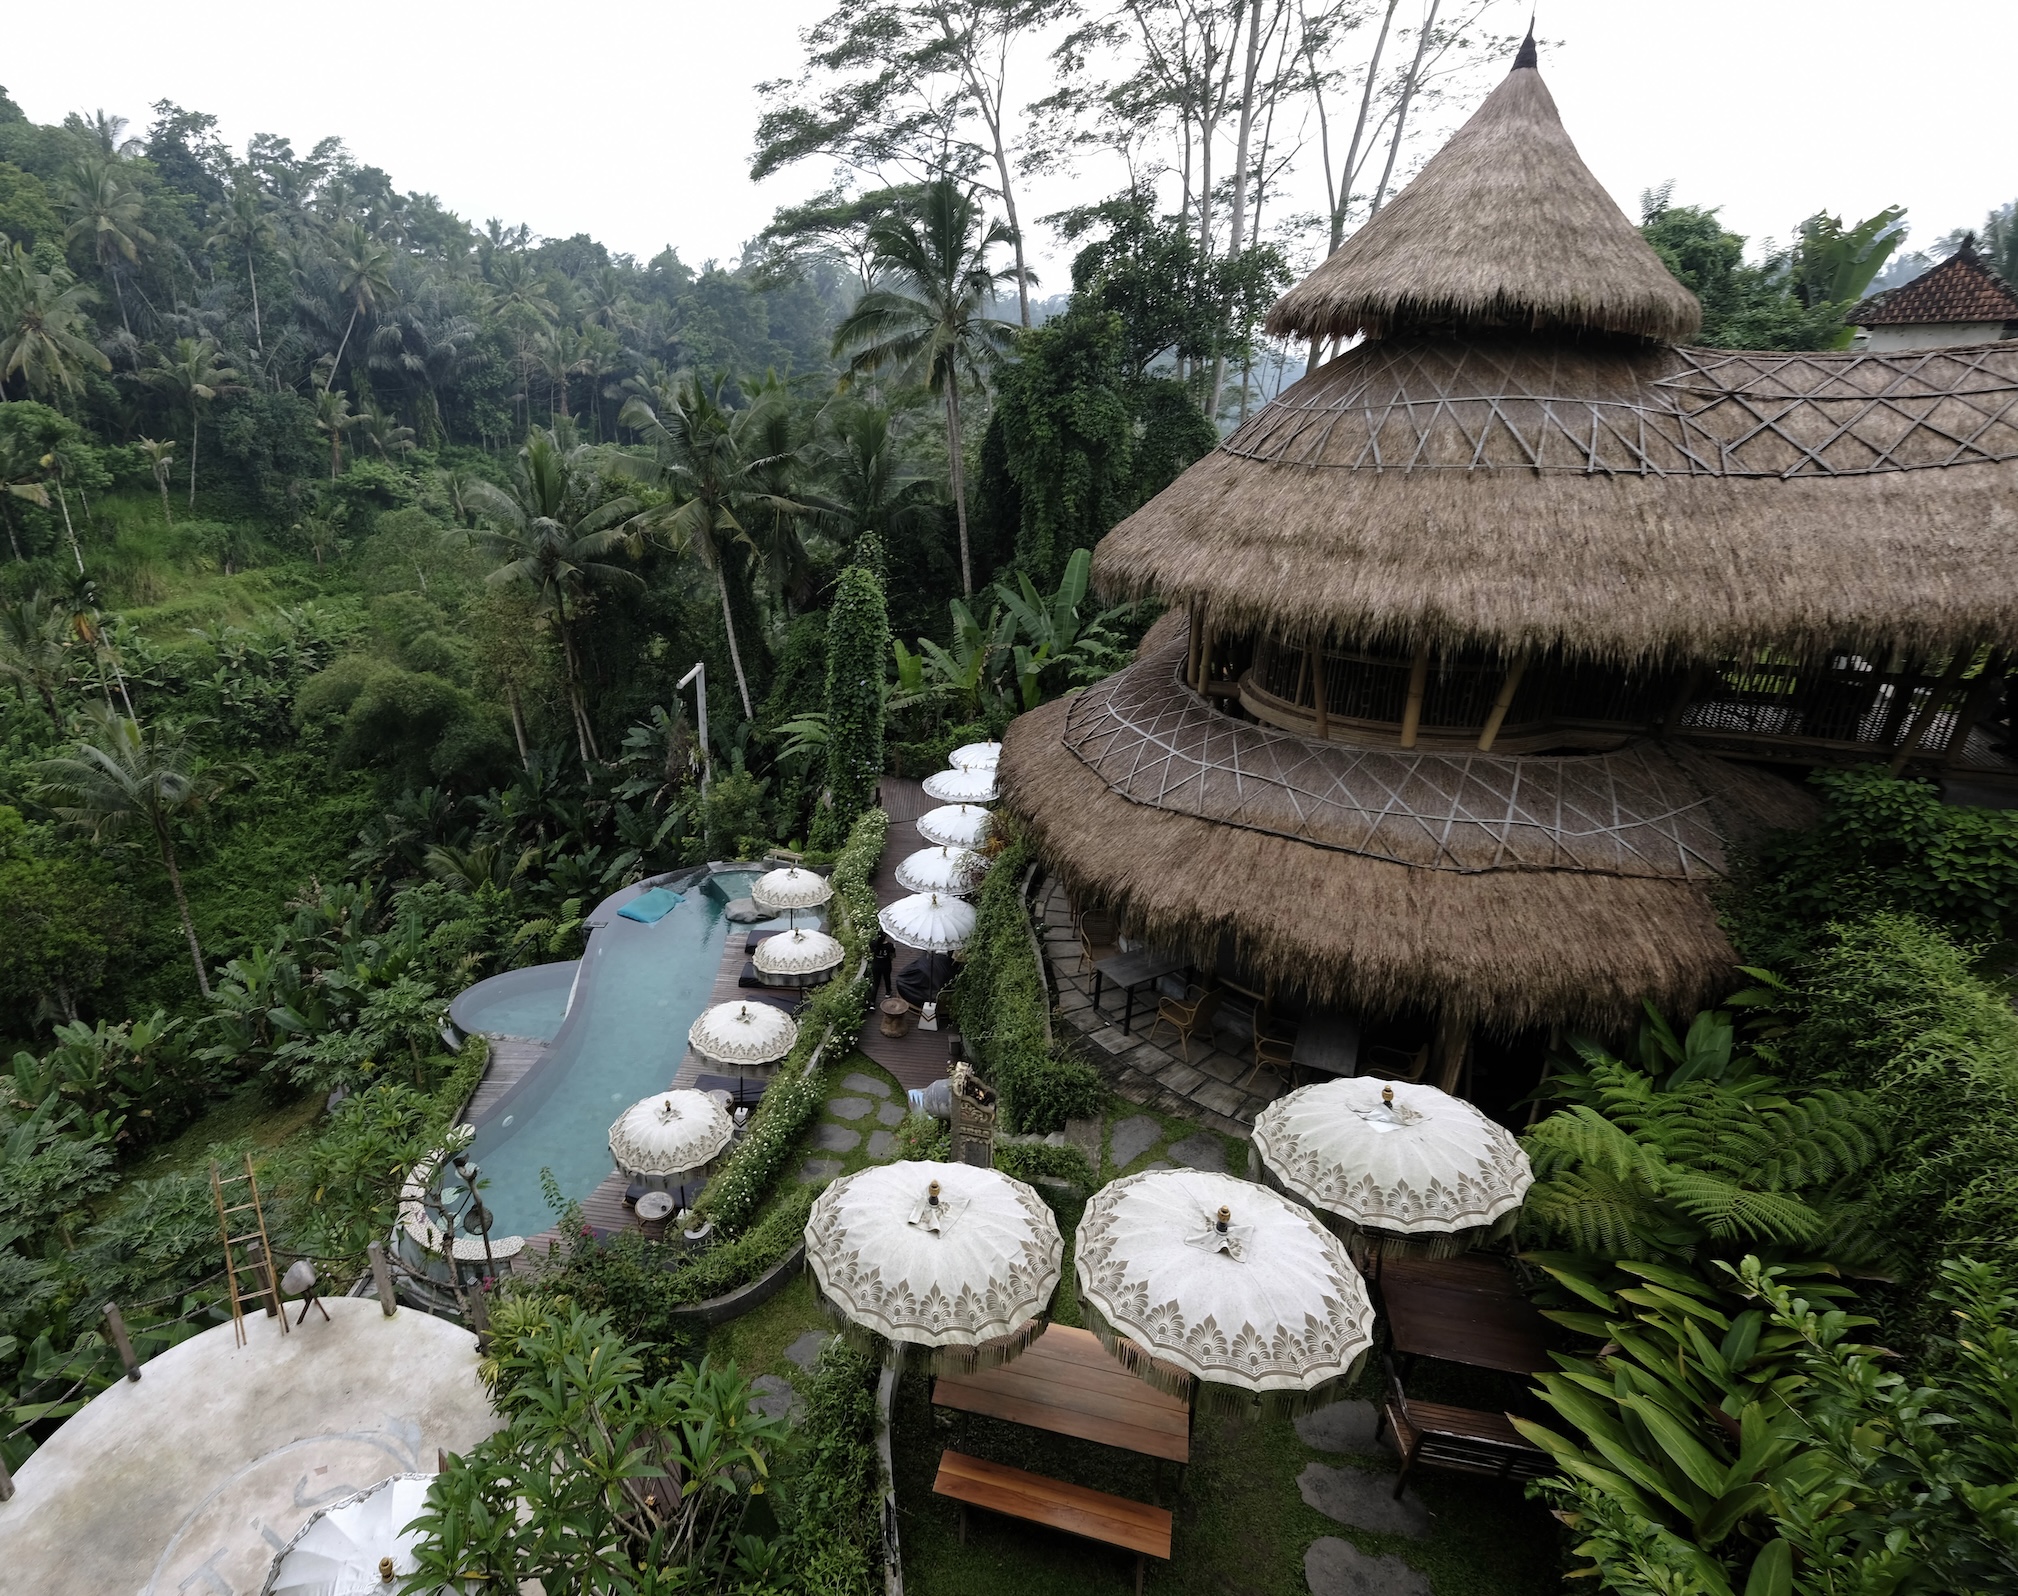 40 Hotels And Restaurants In Bali Reject Proposed Gov’t Bailout Saying It’s Not Enough